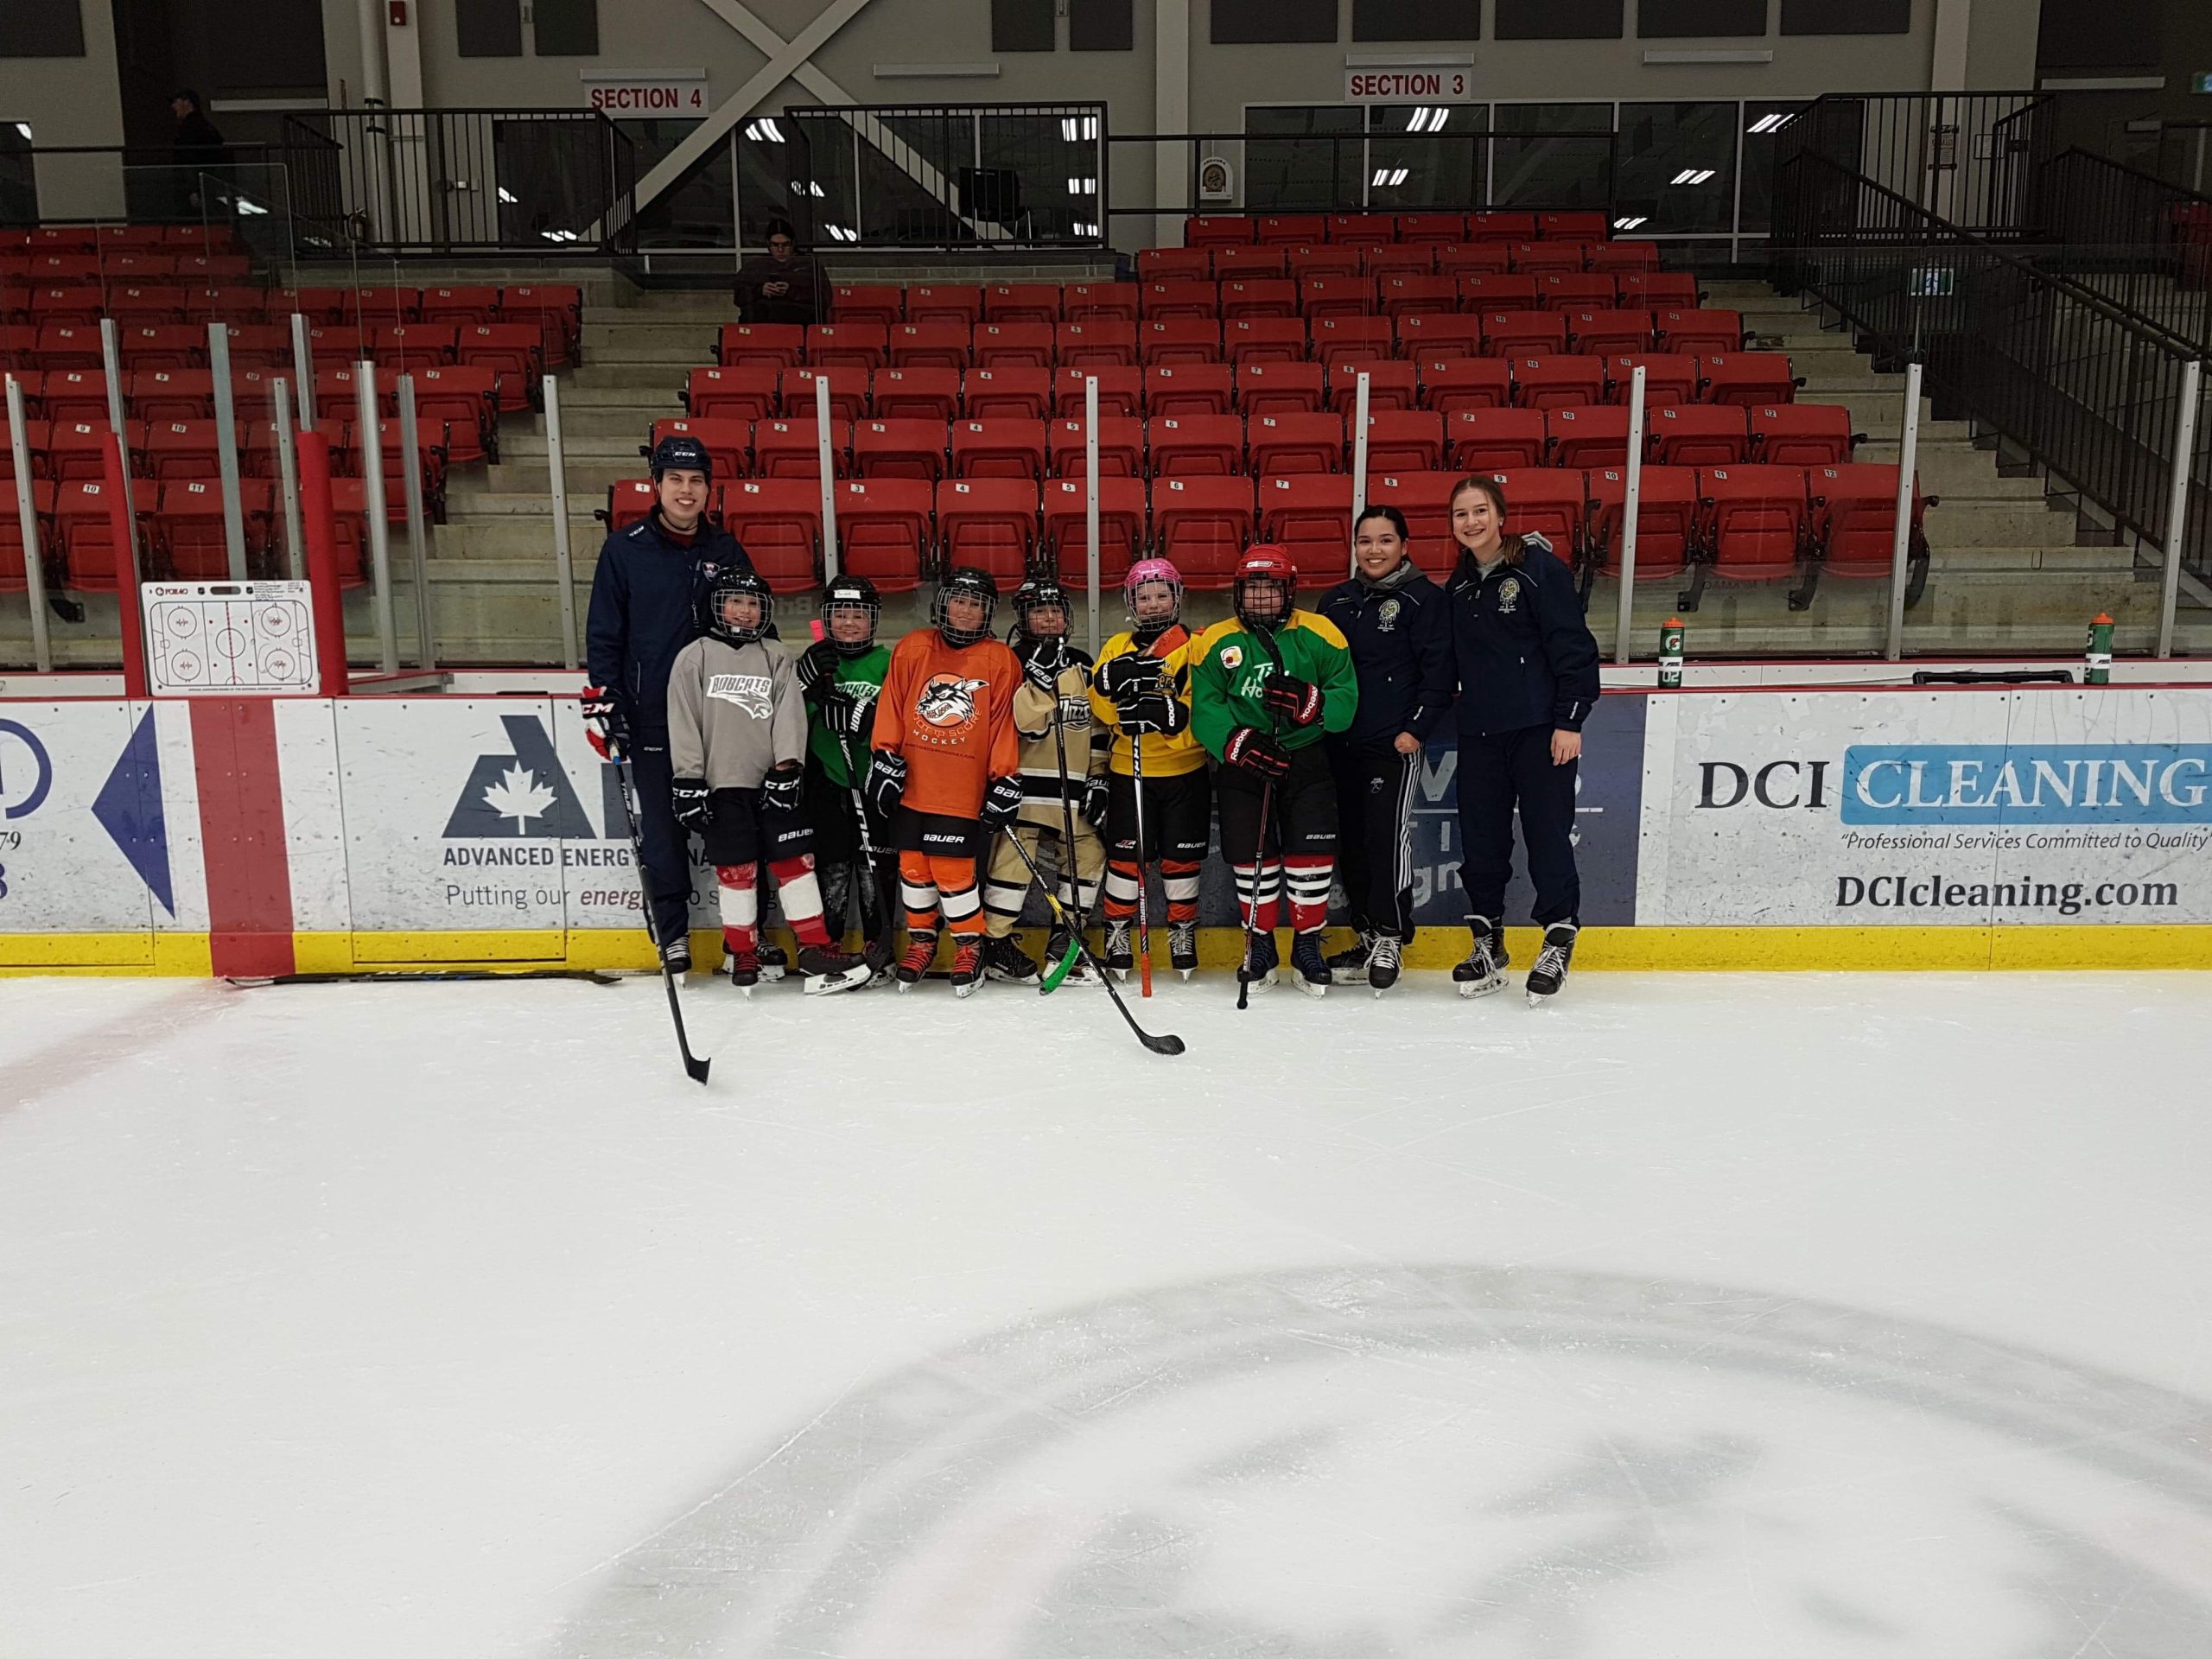 Connecting Indigenous girls to their culture through hockey